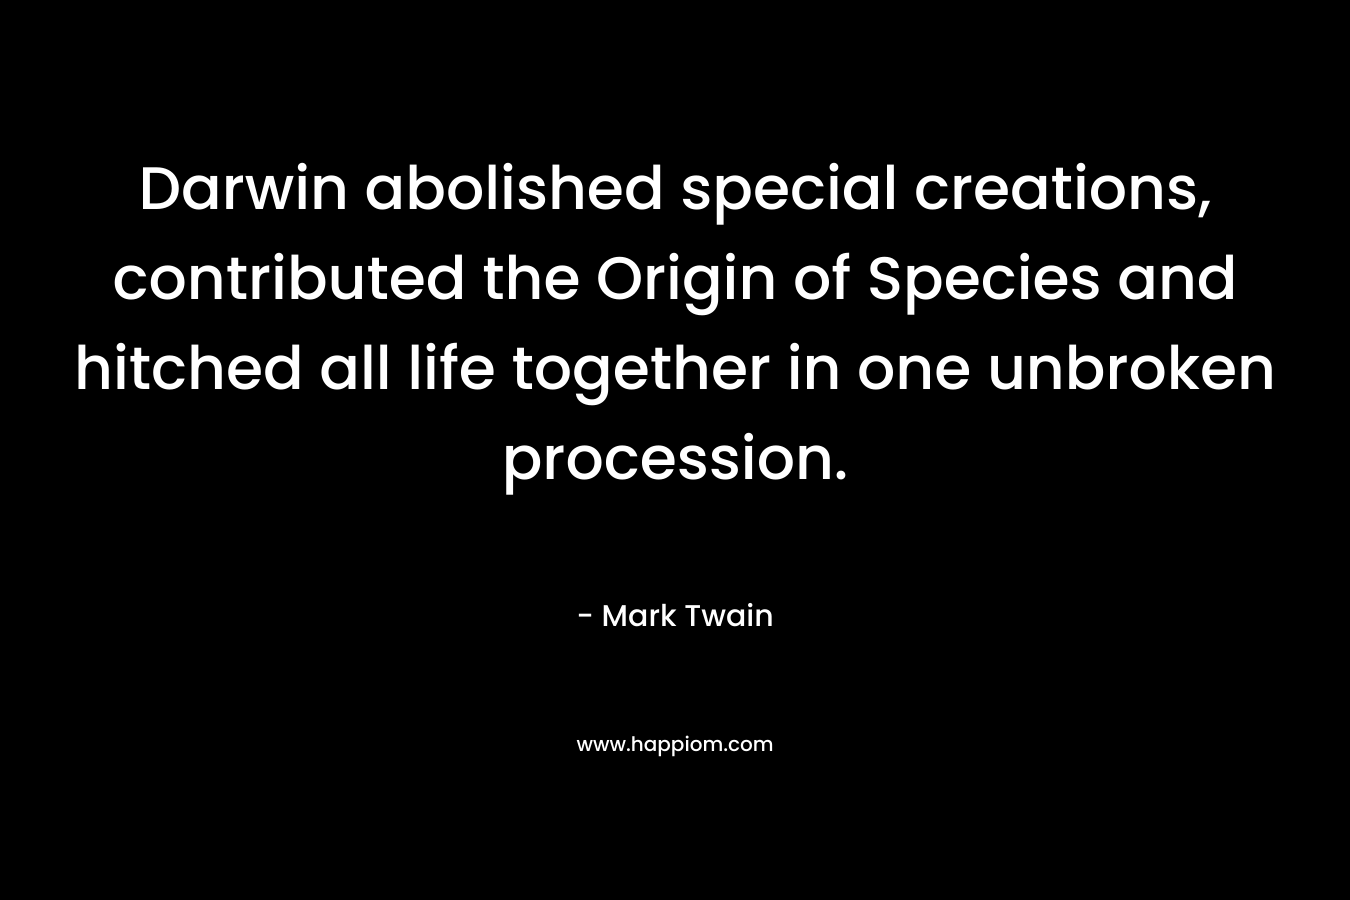 Darwin abolished special creations, contributed the Origin of Species and hitched all life together in one unbroken procession. – Mark Twain